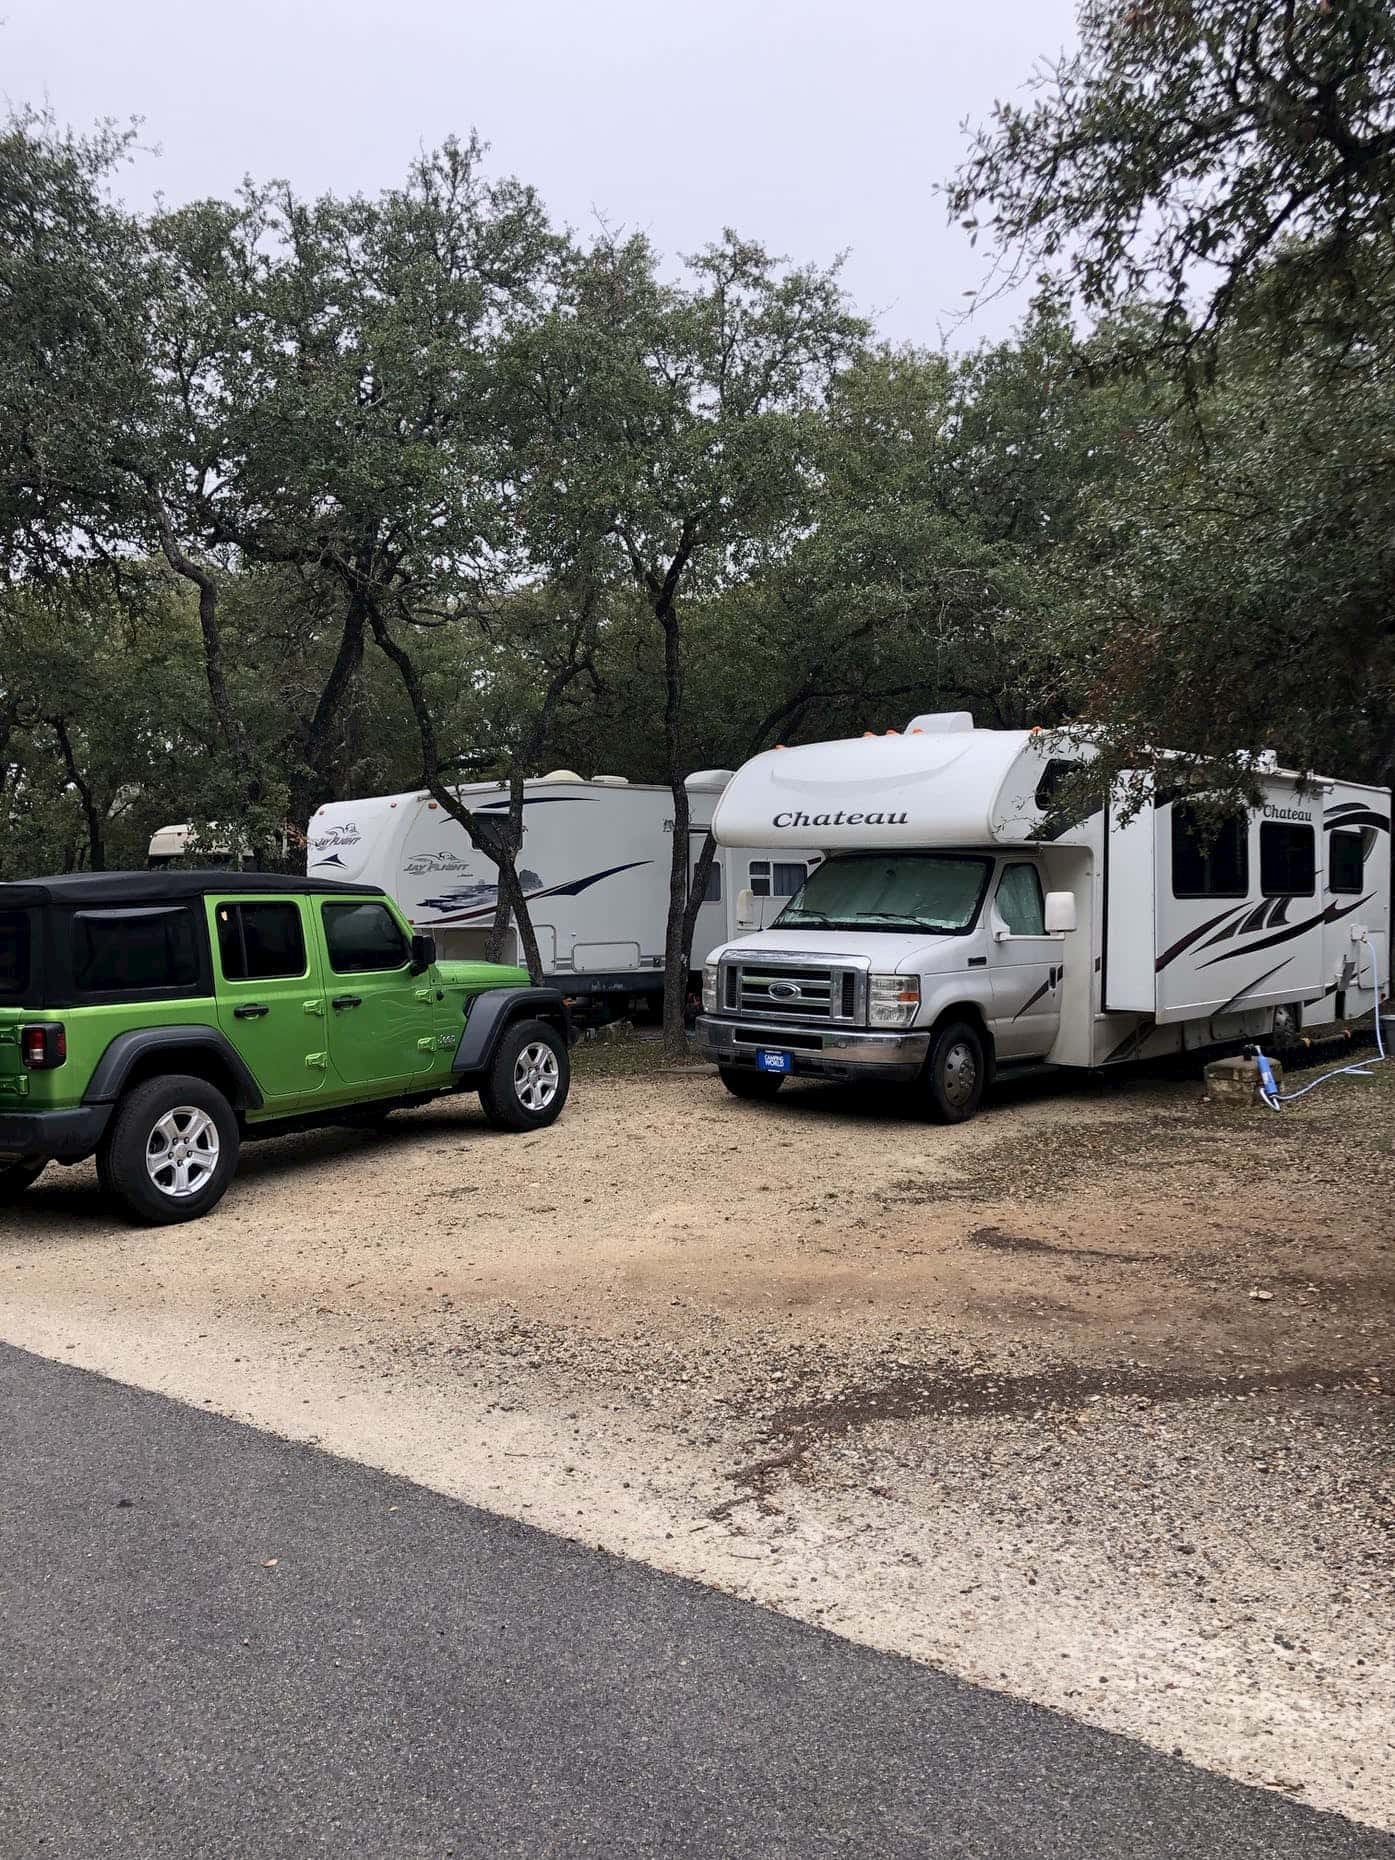 Two RVs parked beside a green jeep in a gravel campsite.